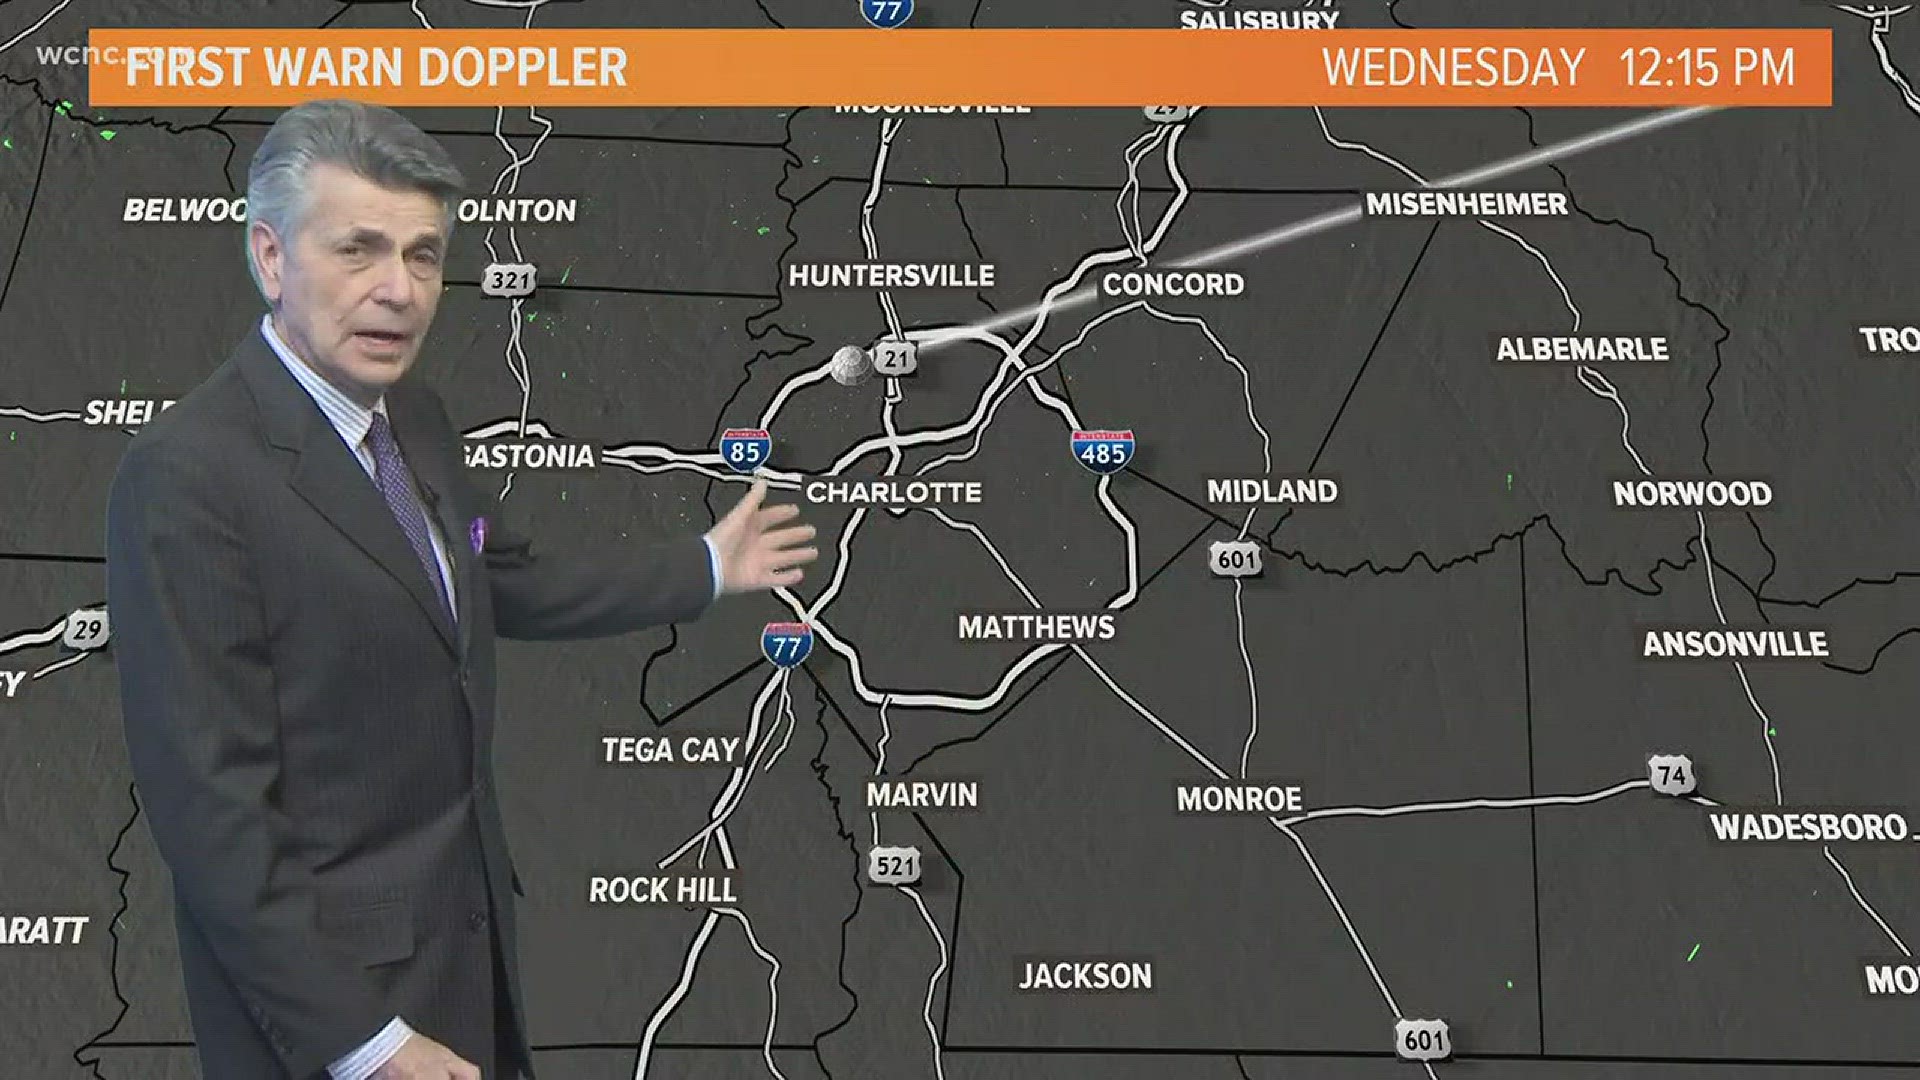 Larry Sprinkle has a look at Wednesday's forecast